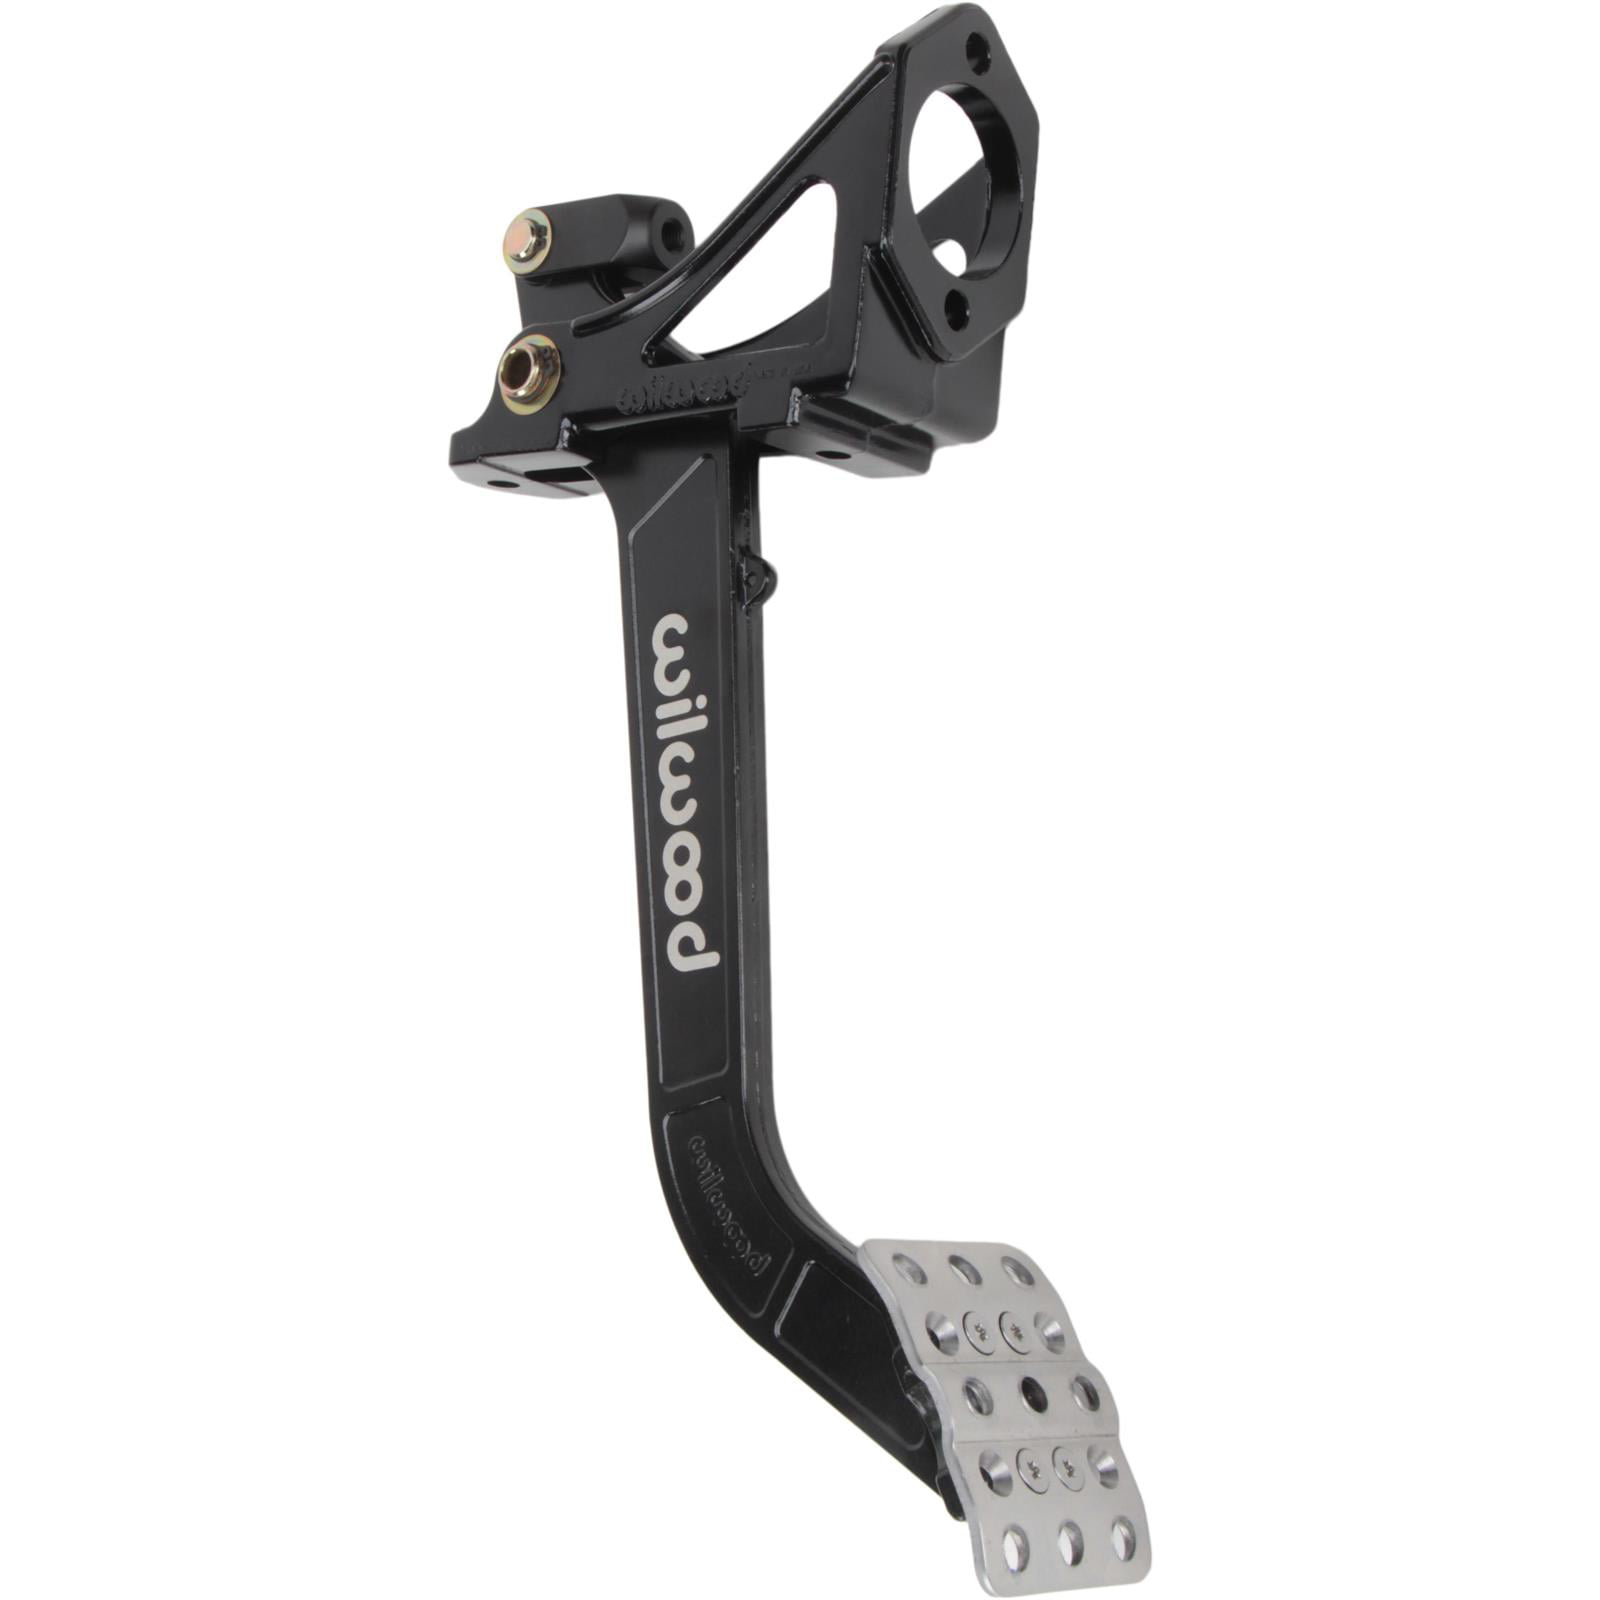 Swinging clutch pedal conversion